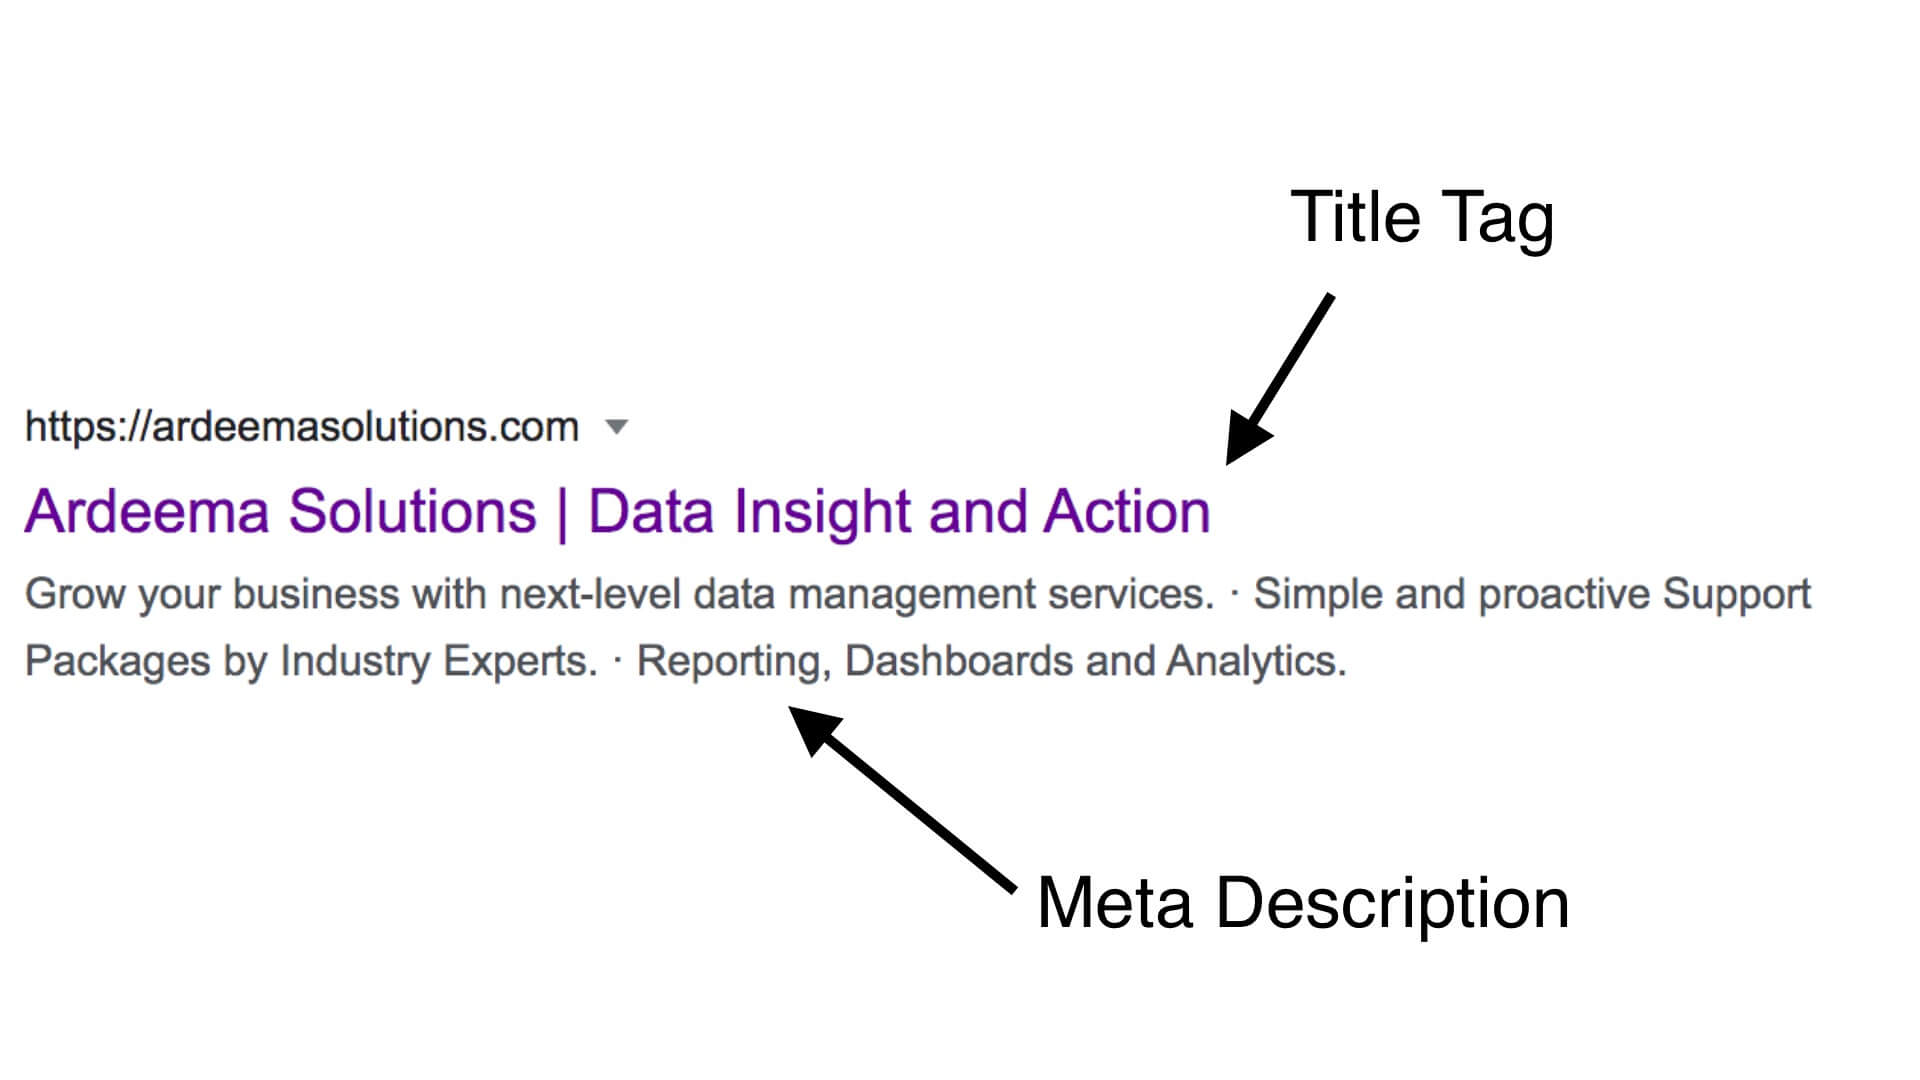 Example of Title Tag and Meta Description for Ardeema Solutions